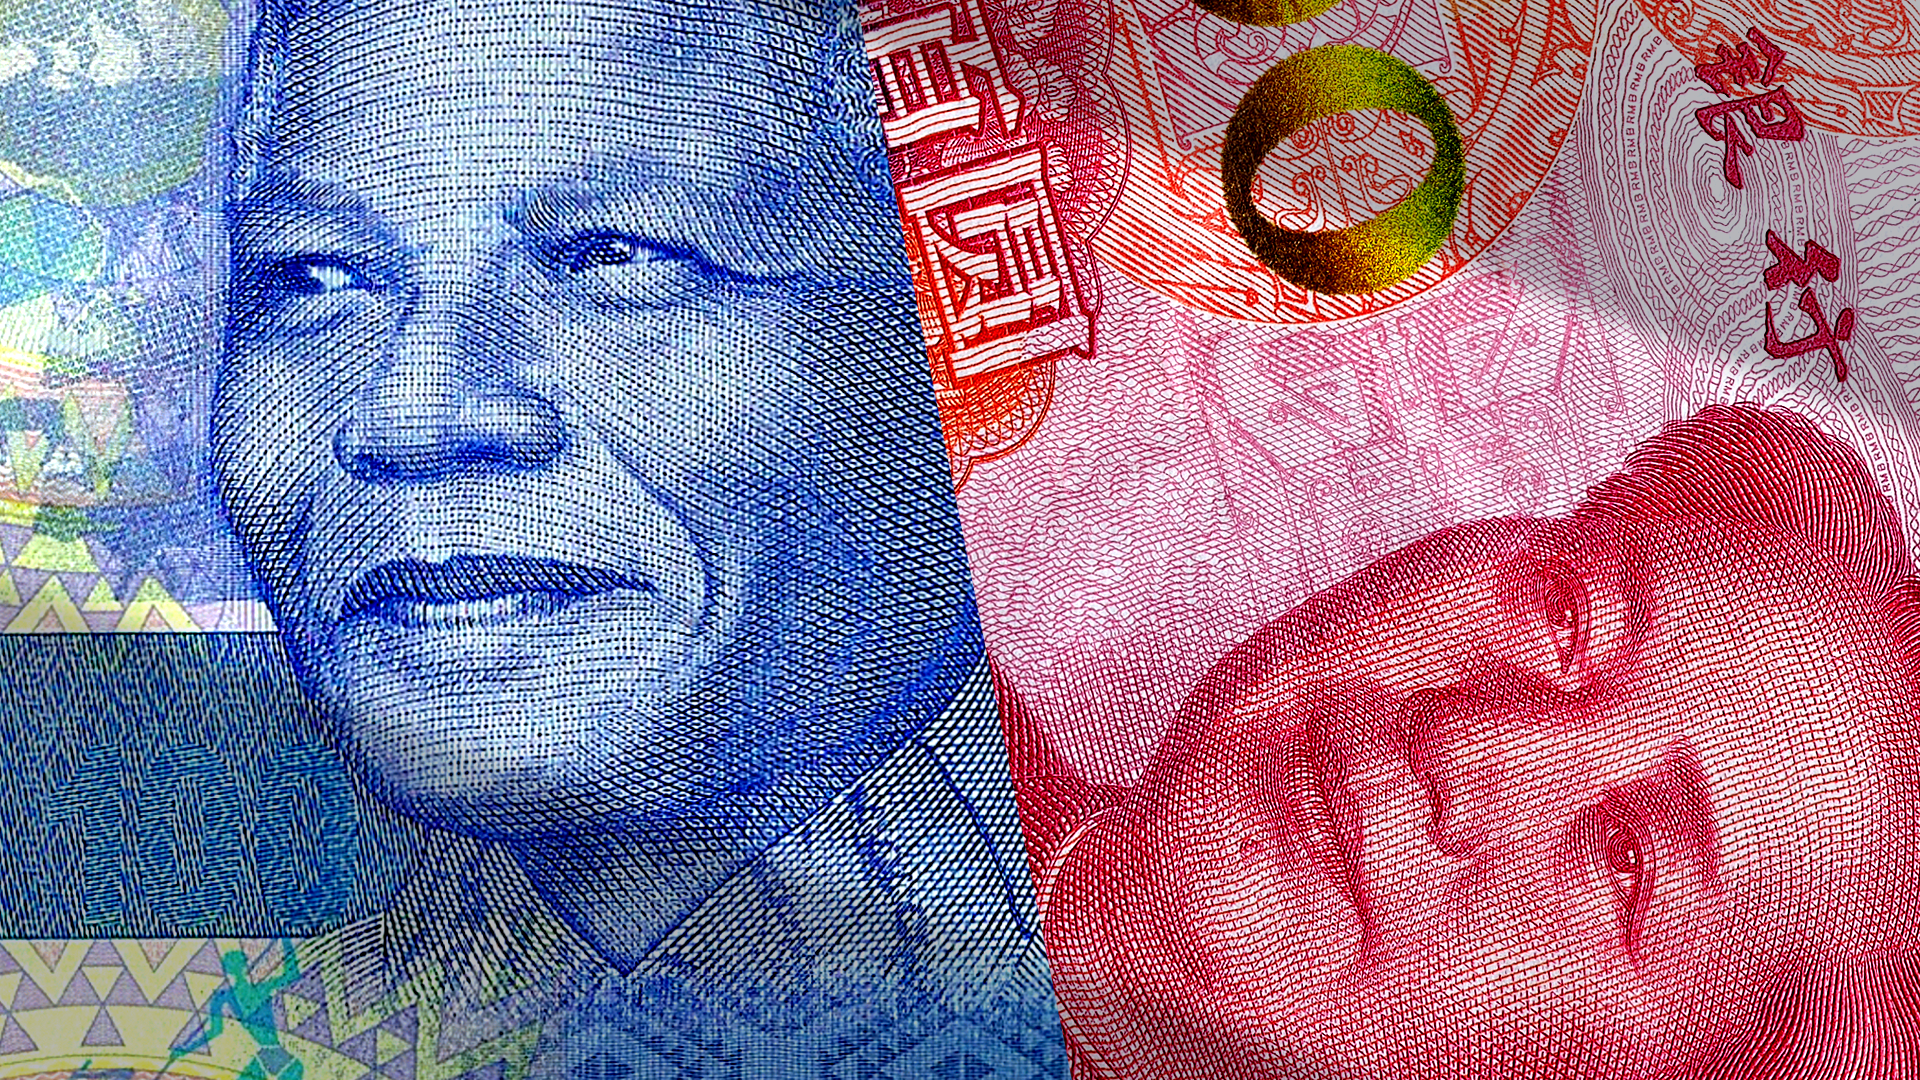 Photo collage of South African and Chinese currency notes